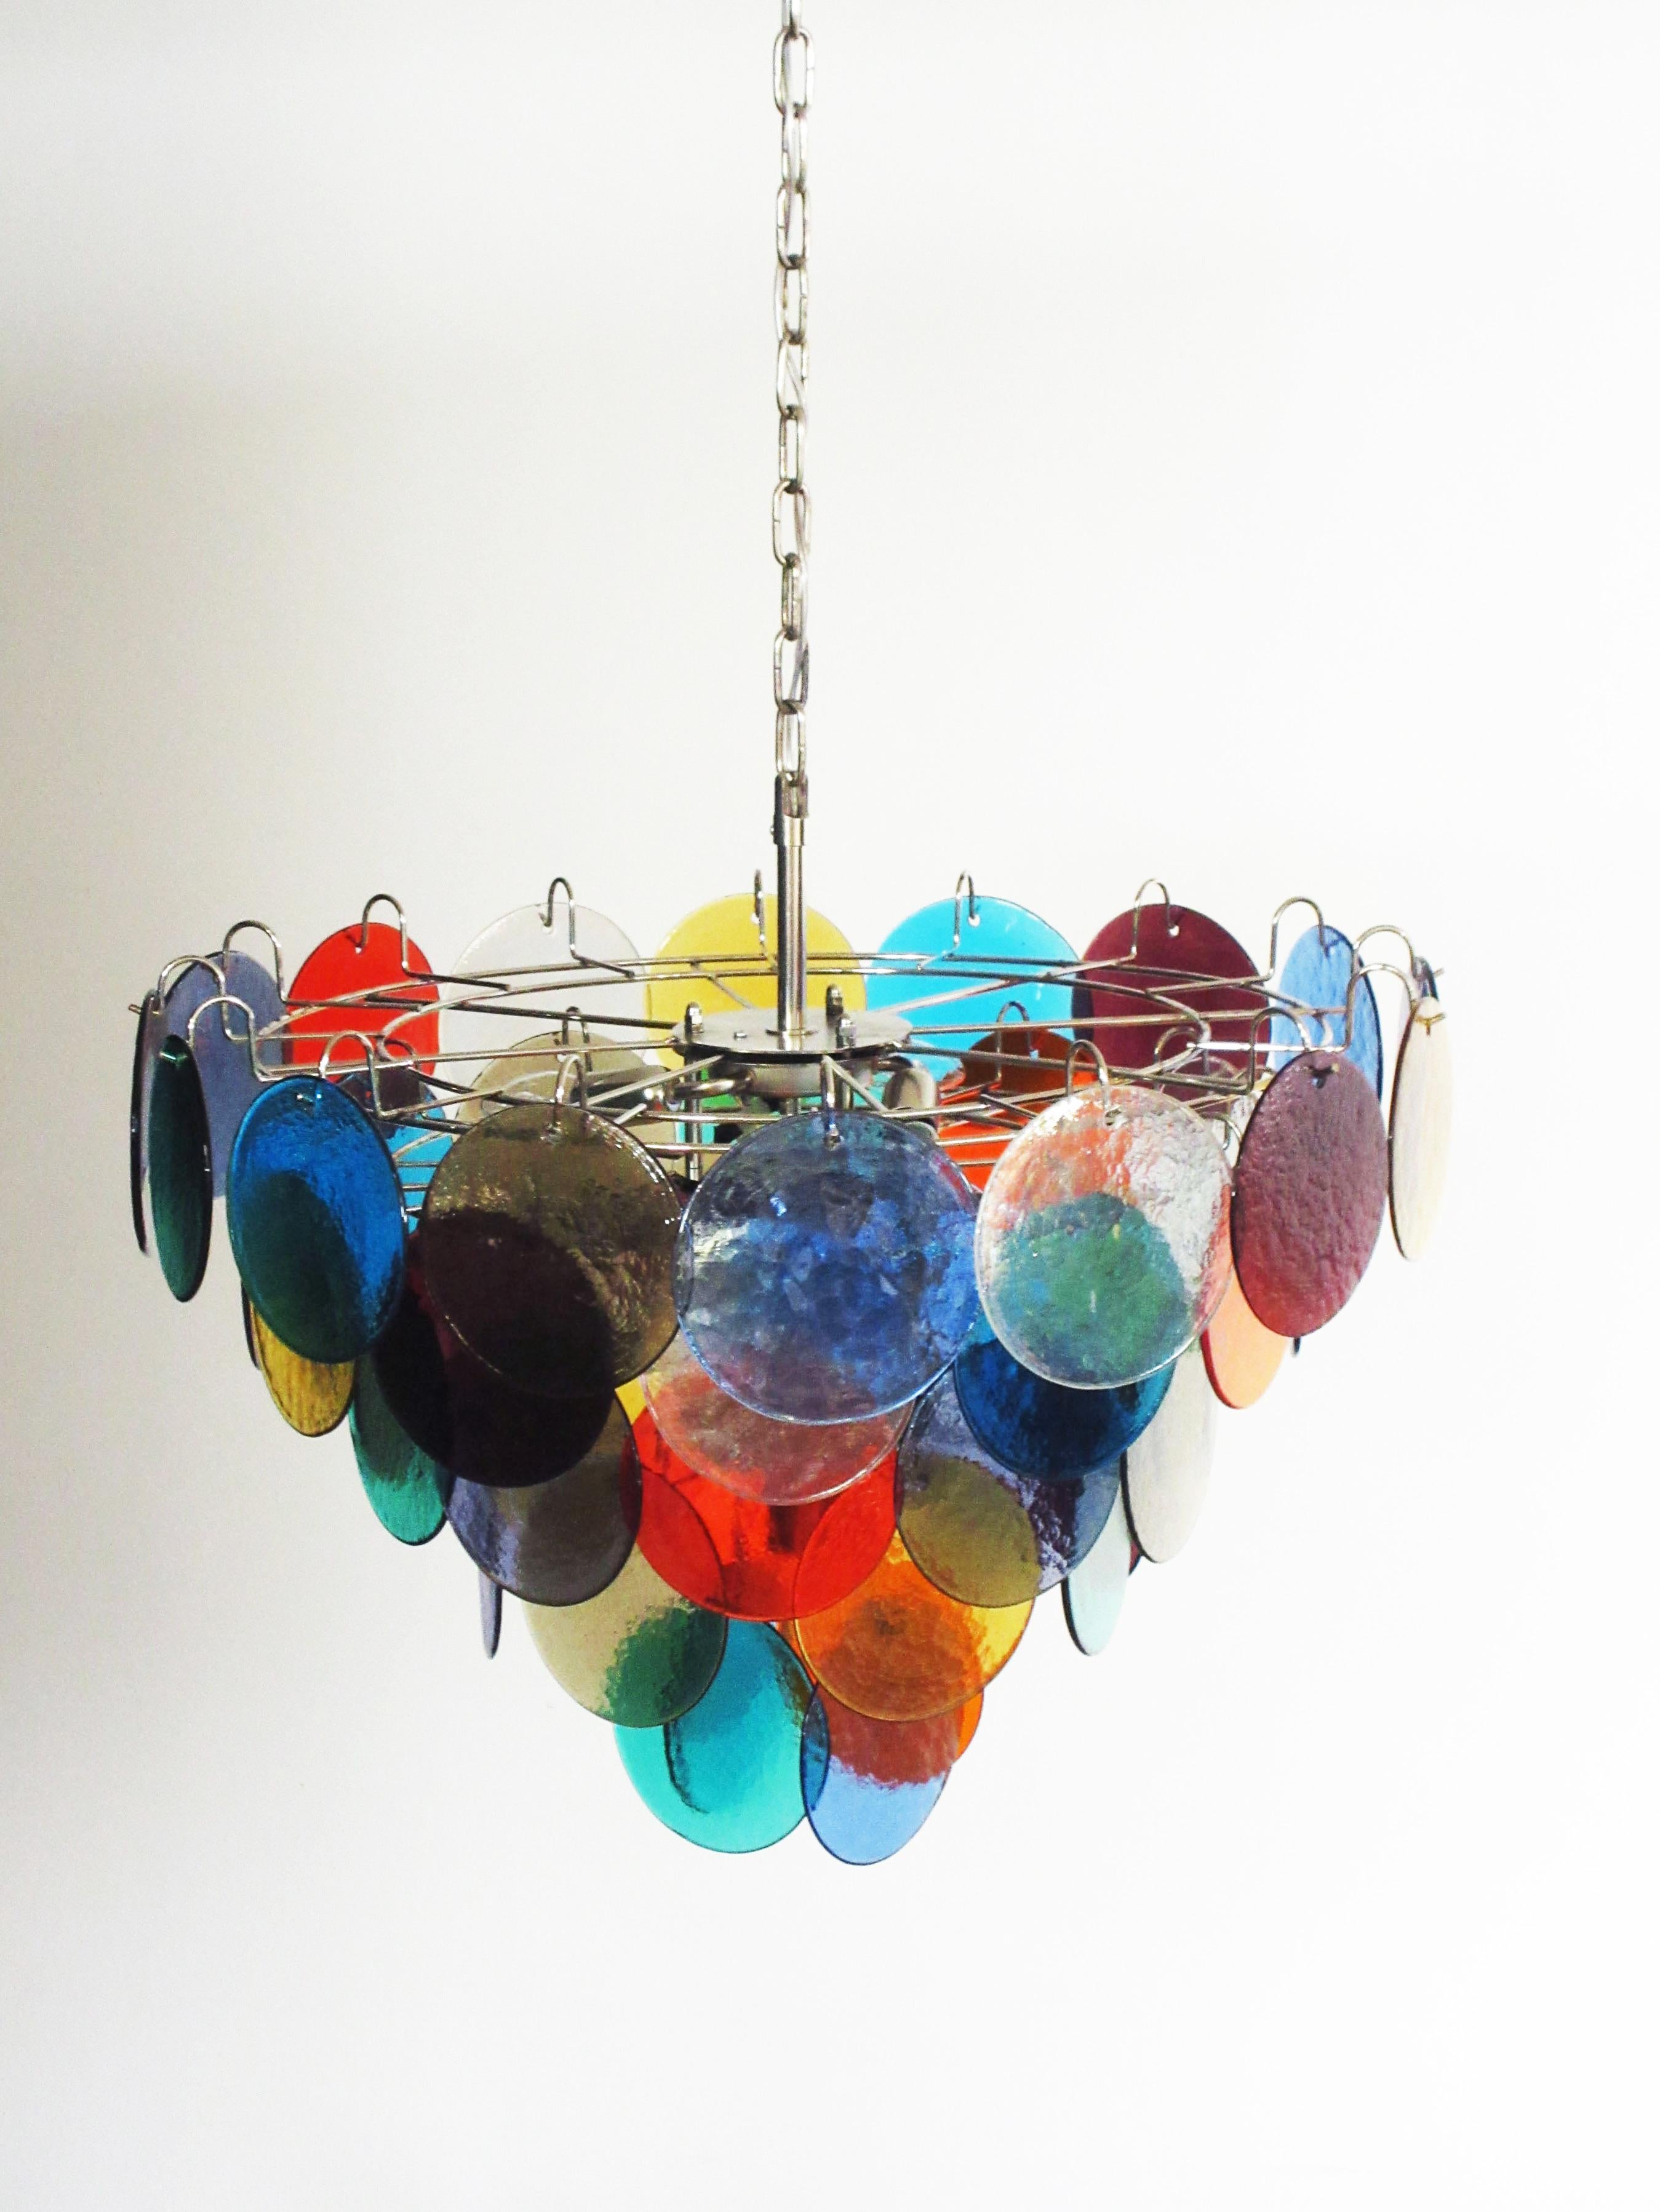 Each chandelier has 50 Murano multicolored glass disks. The glasses are now unavailable, they have the particularity of reflecting a multiplicity of colors, which makes the chandelier a true work of art. Nickel metal frame.
Period: